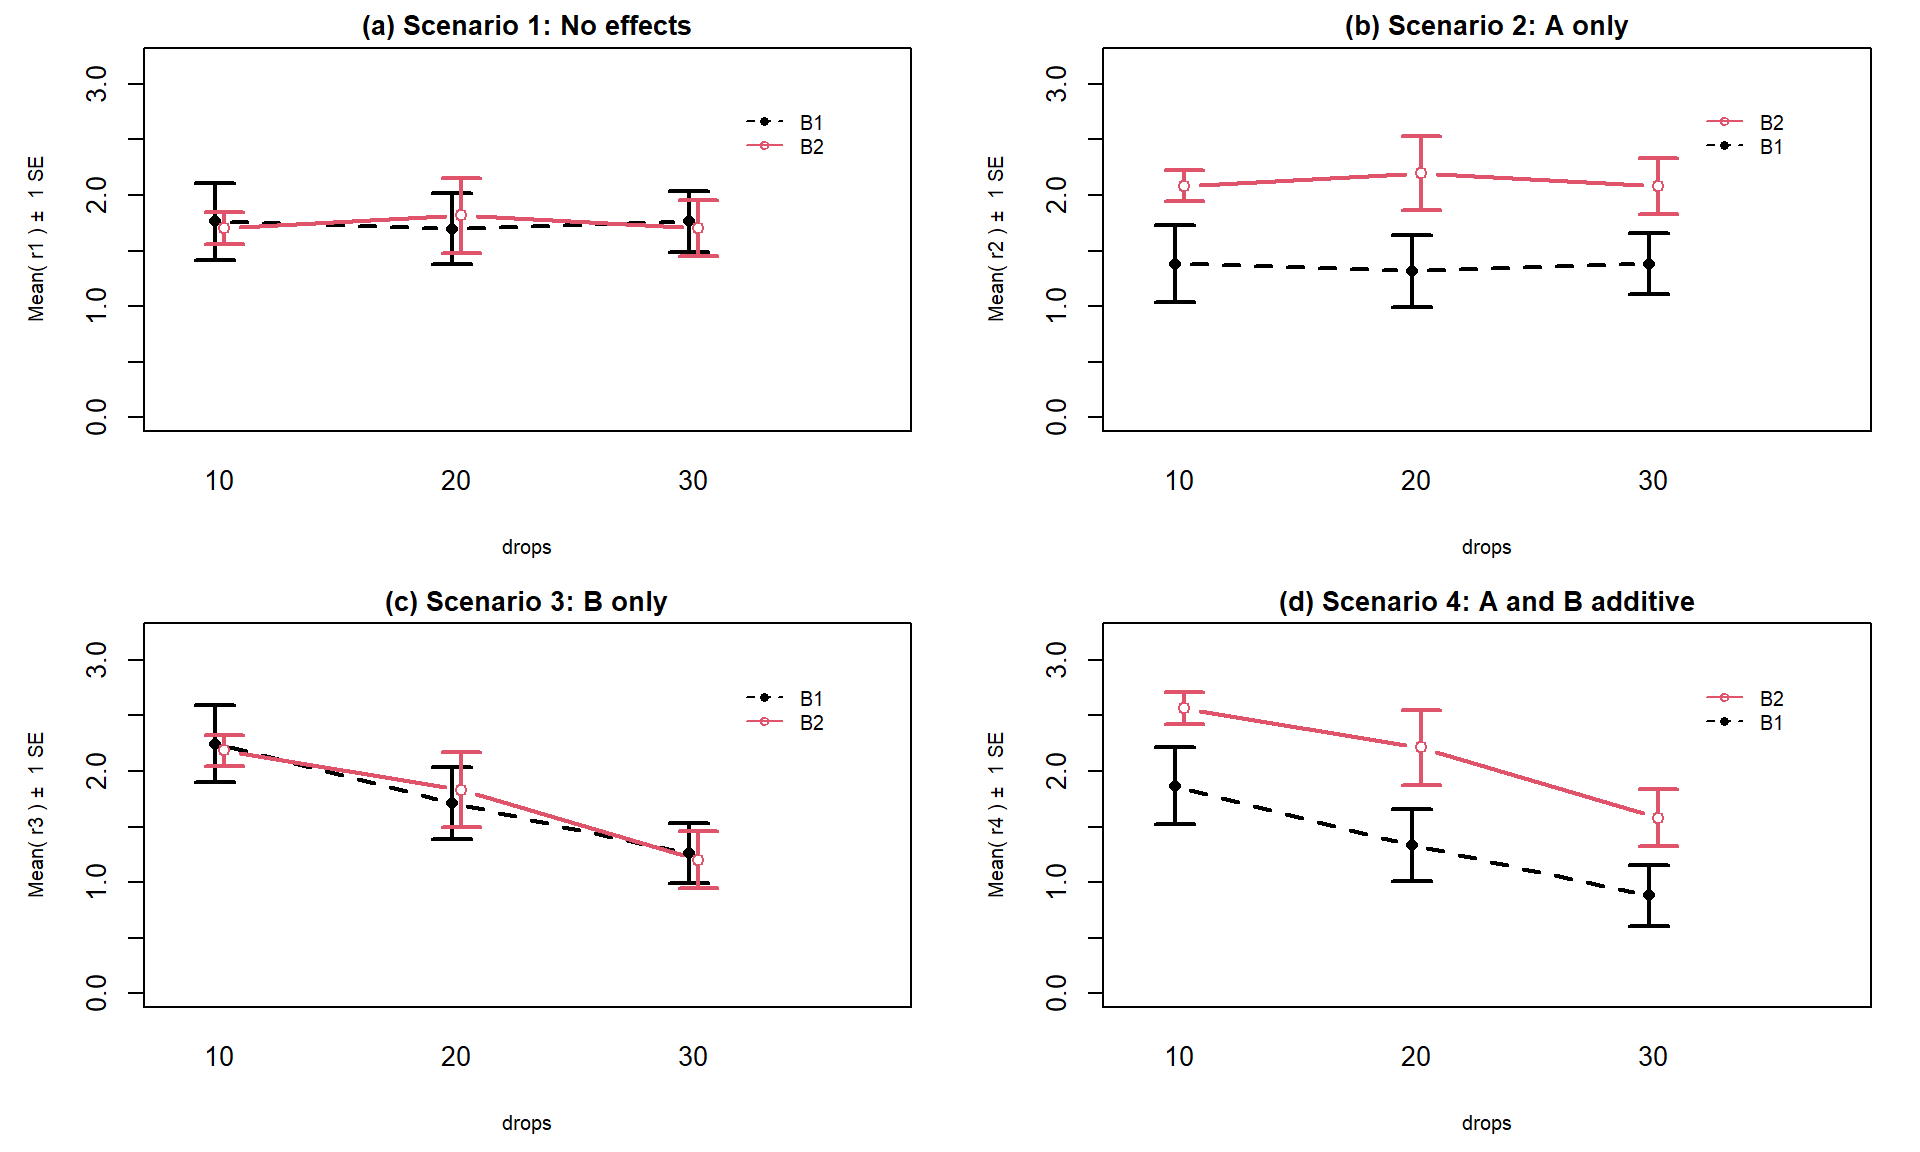 Interaction plots of four possible scenarios in the paper towel study.